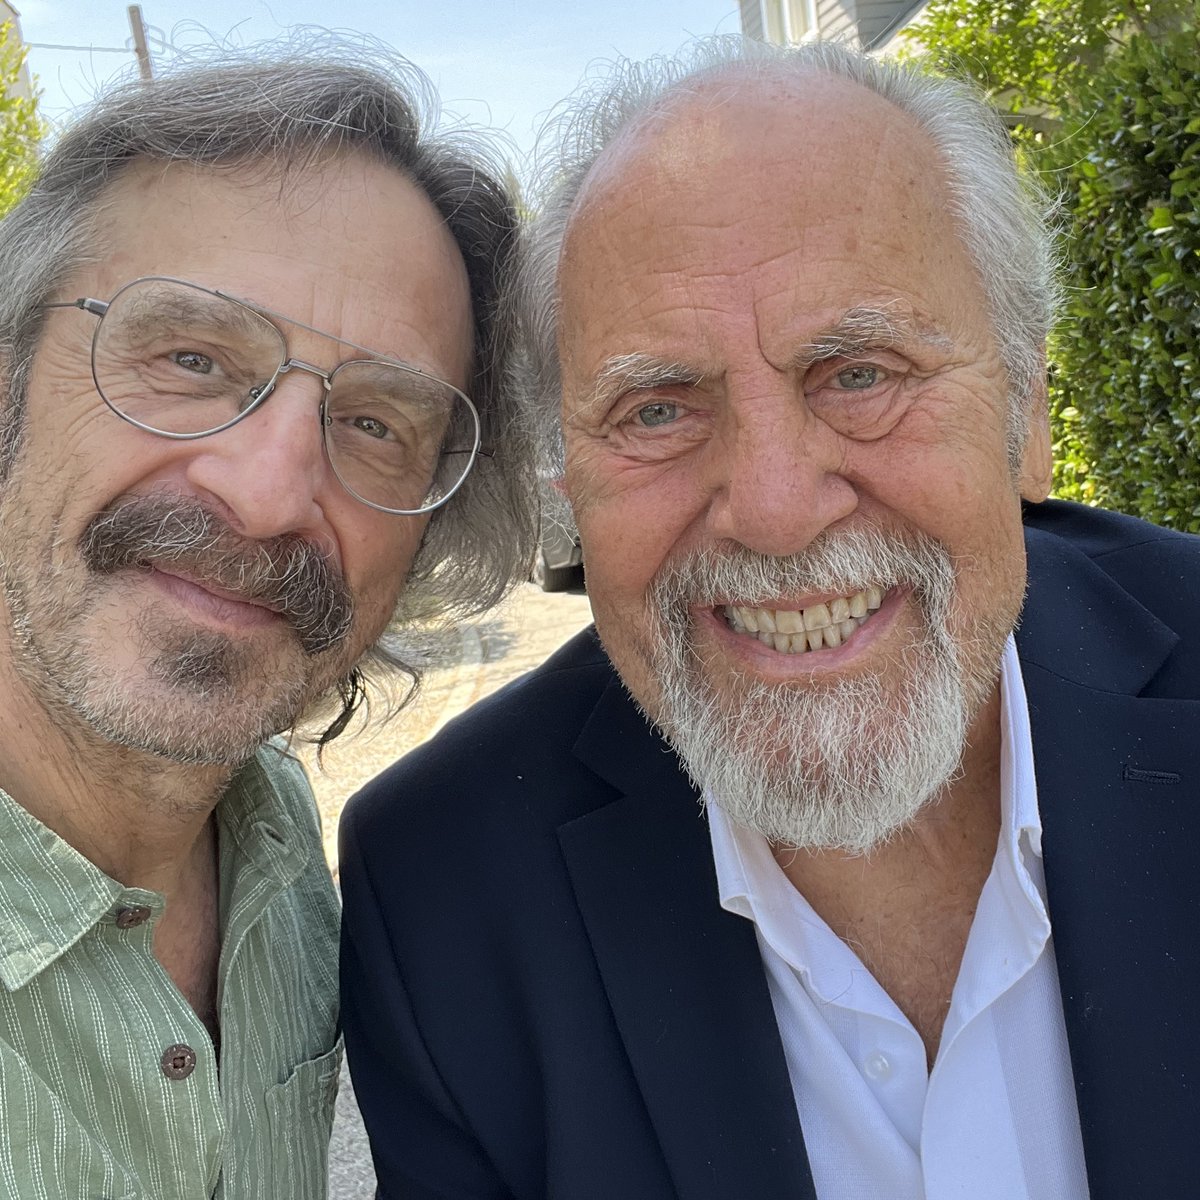 Today is George Schlatter day on wtfpod.com! Stories about Sammy Davis, Don Rickles, Lucille Ball, Frank Sinatra, Goldie Hawn, Tiny Tim and more! Great talk! Do it up! Episode - wtfpod.com/podcast/episod… On @spotifypodcasts - open.spotify.com/episode/49sjlB…